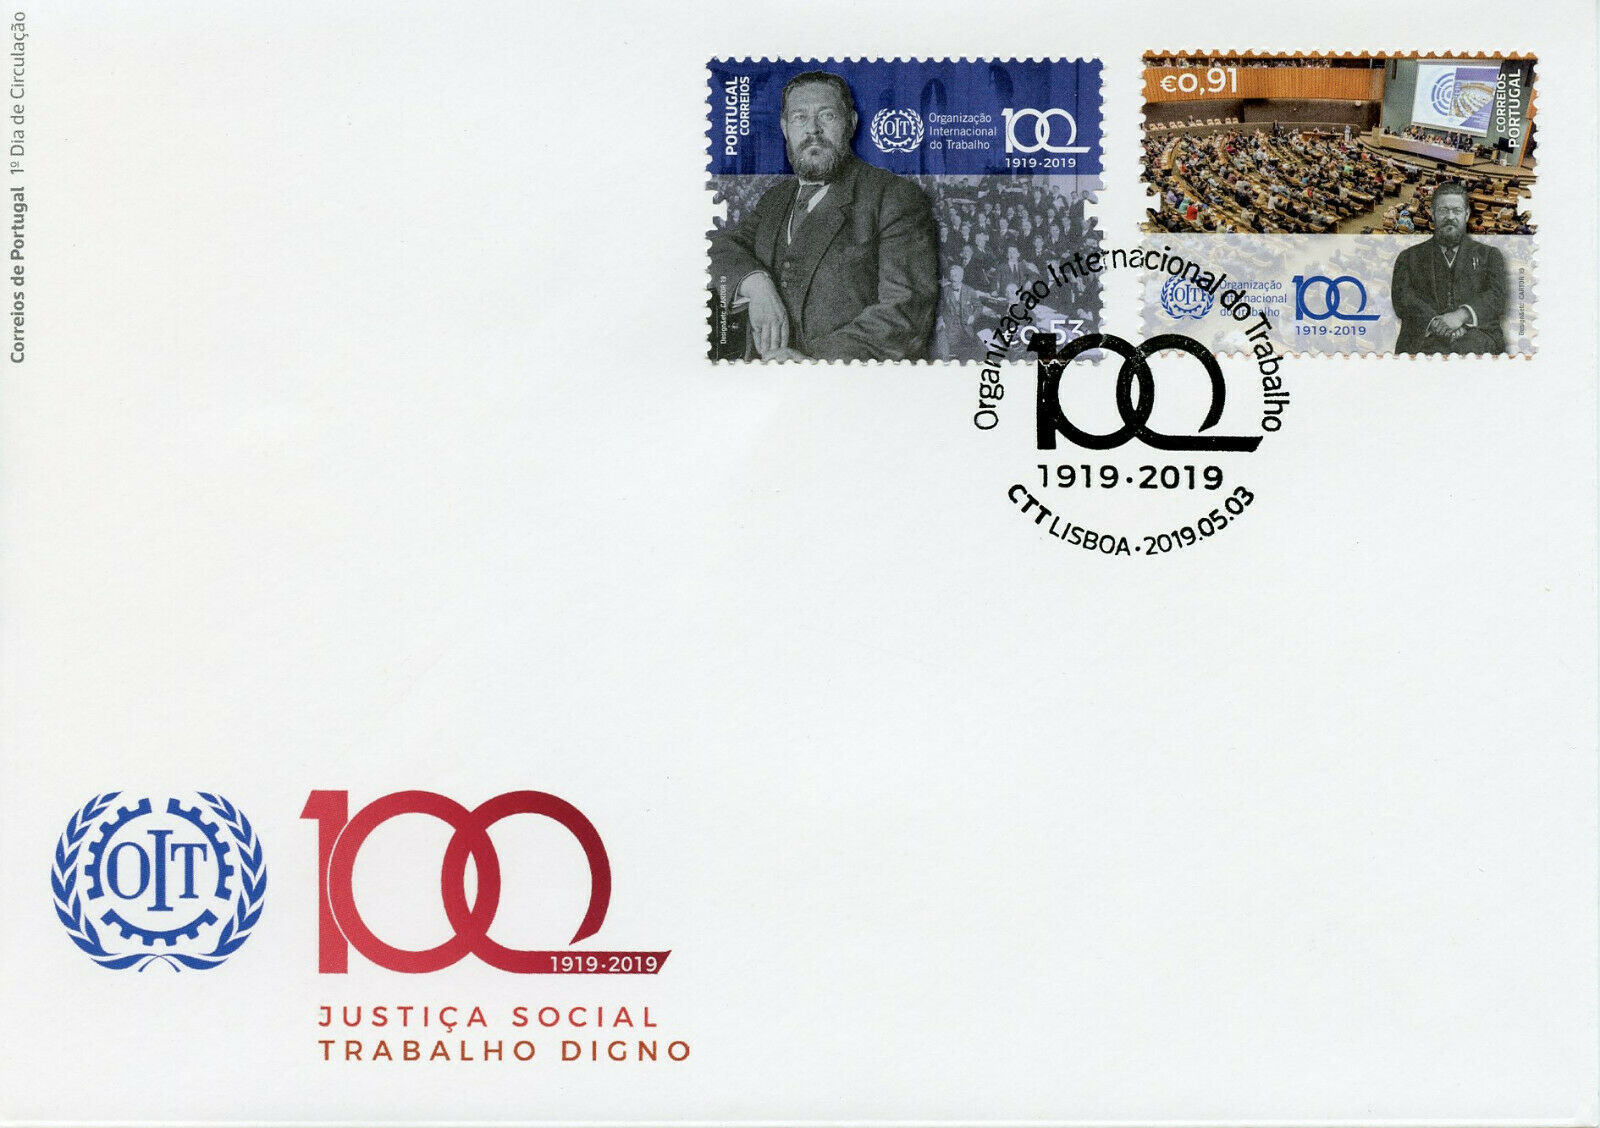 Portugal 2019 FDC OIT International Labour Labor Organization 3v Cover Stamps